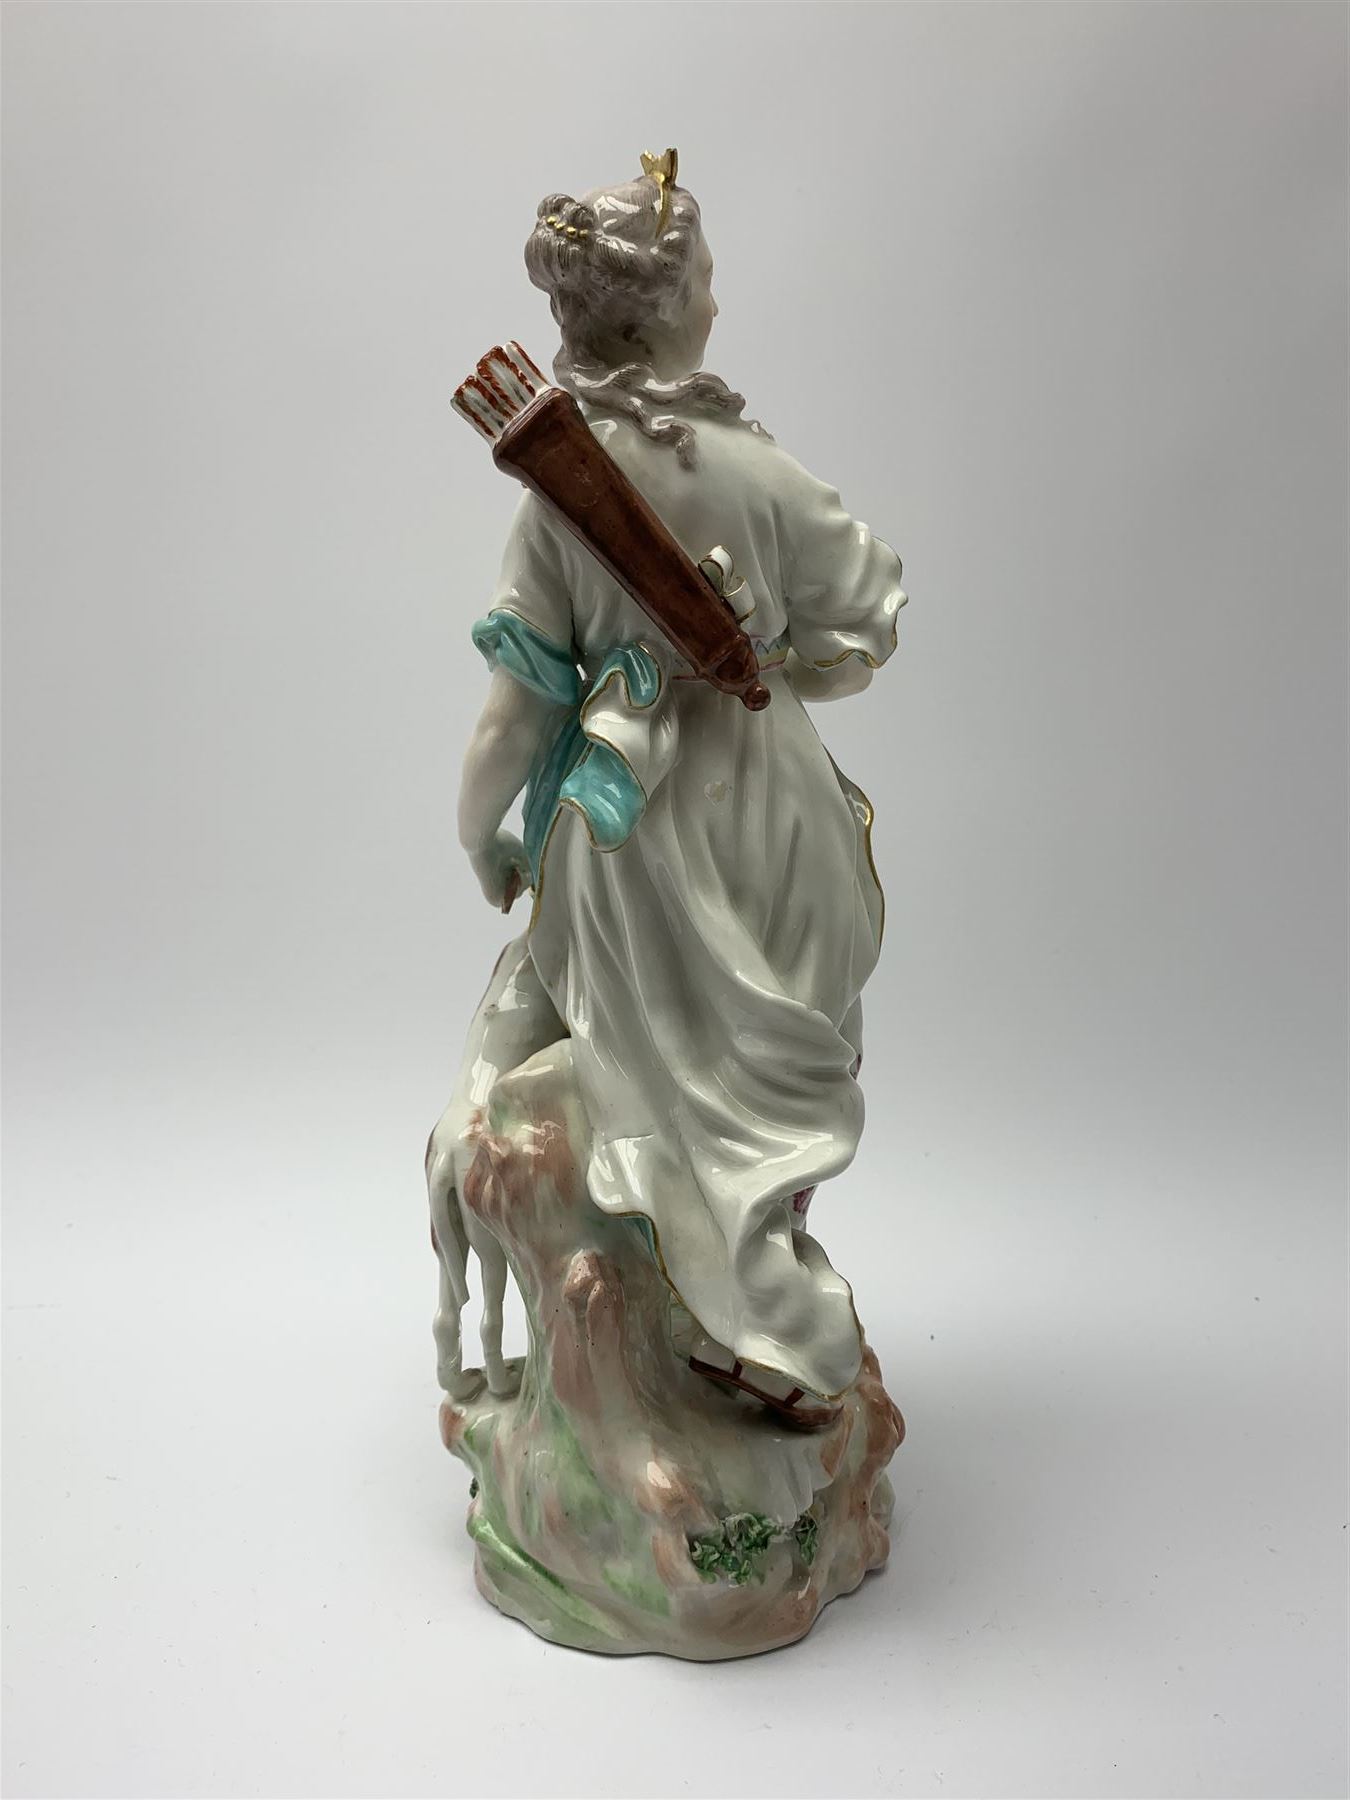 Mid 18th century Derby porcelain figure modelled as Dianna the Huntress - Image 5 of 9